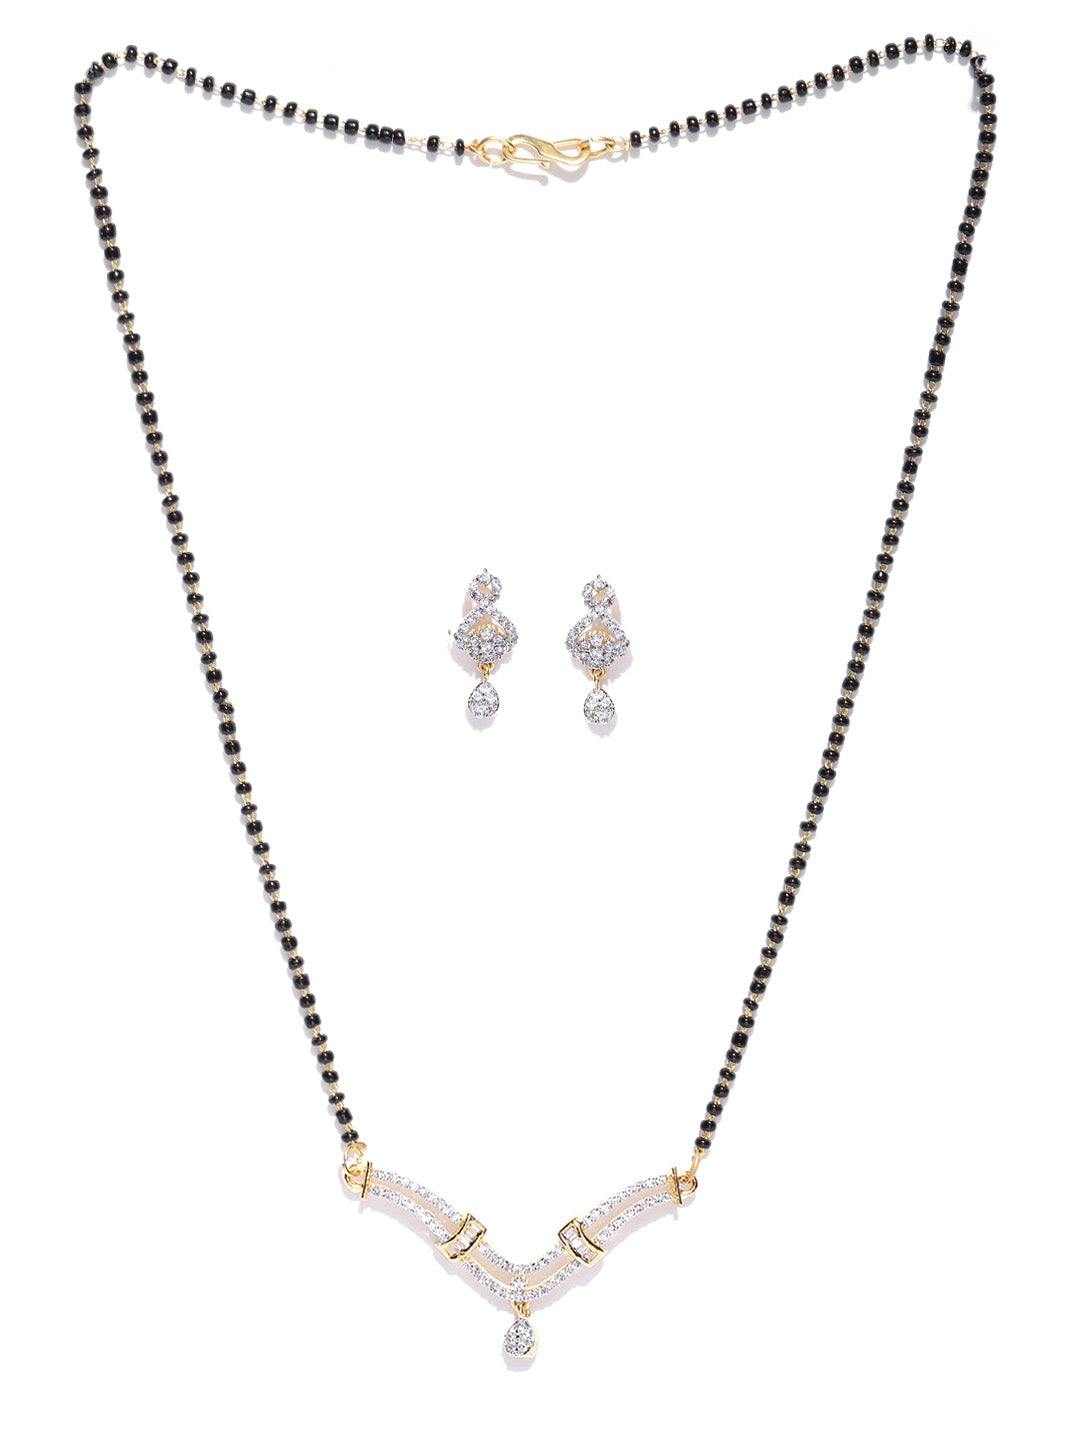 Dual-Toned AD Studded Dual Layer Curved V Shaped Mangalsutra Set